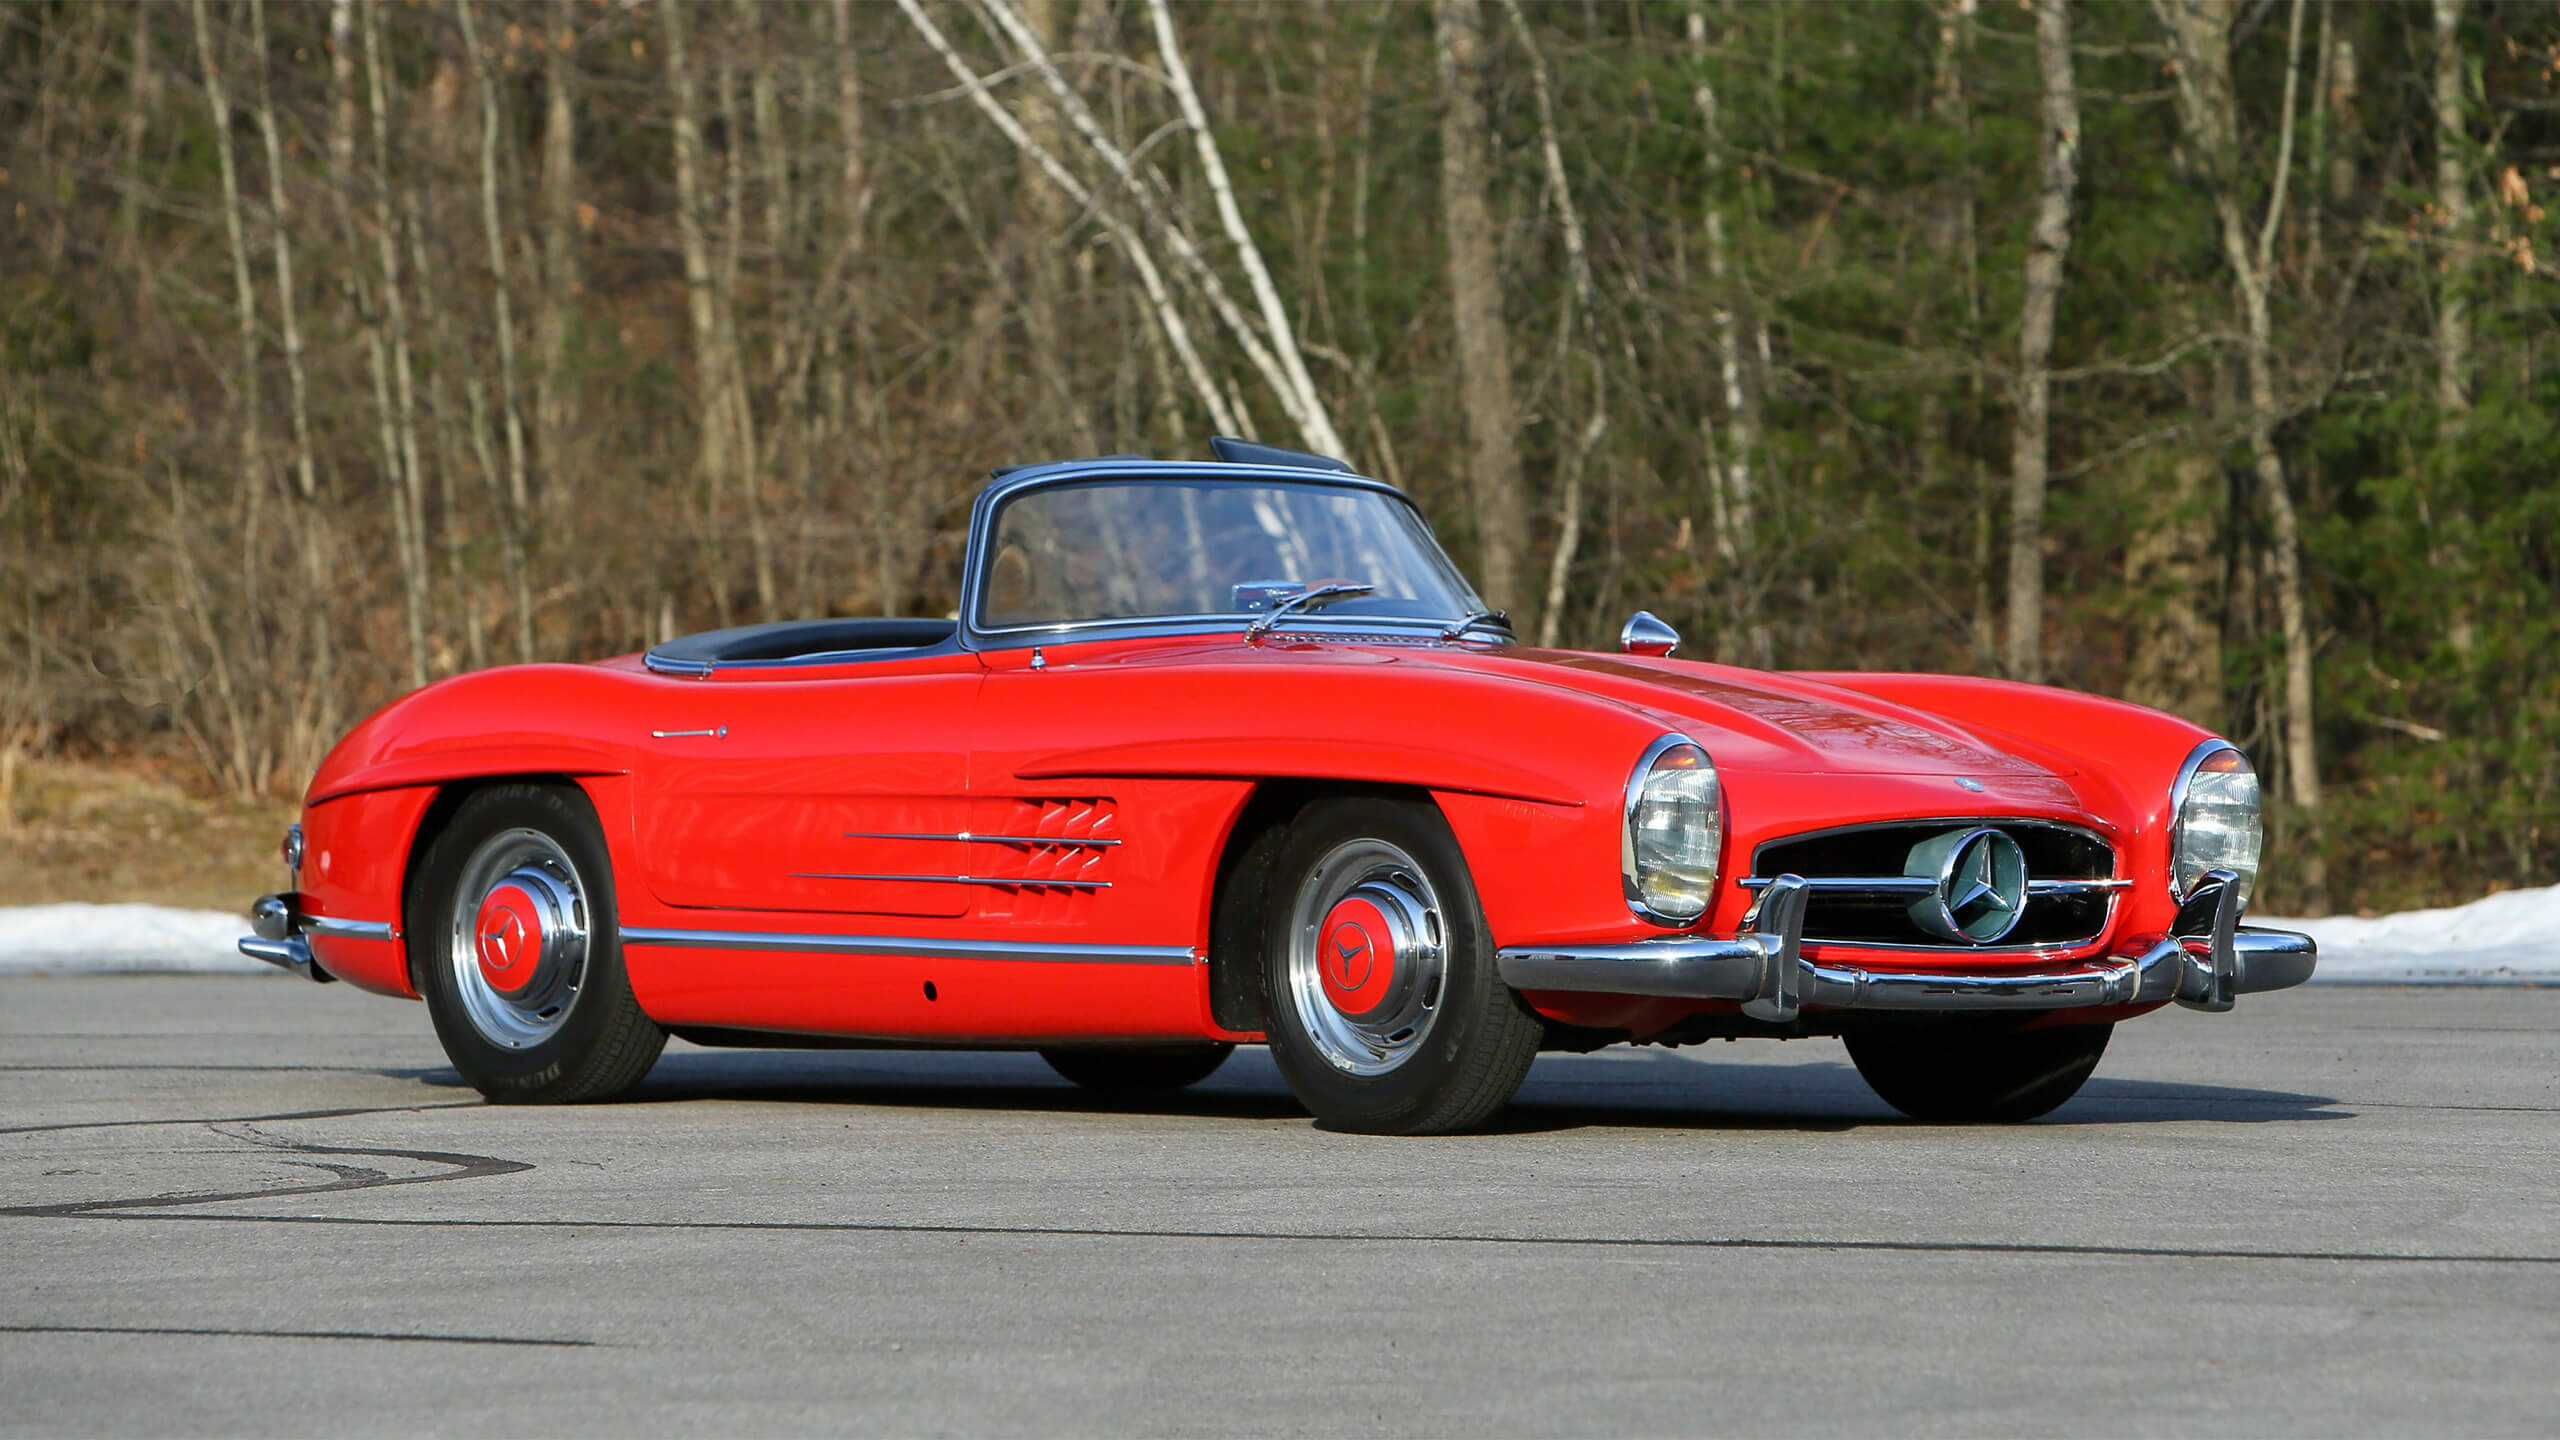 Broad Arrow sells the Jim Taylor Collection cars for $20.4m